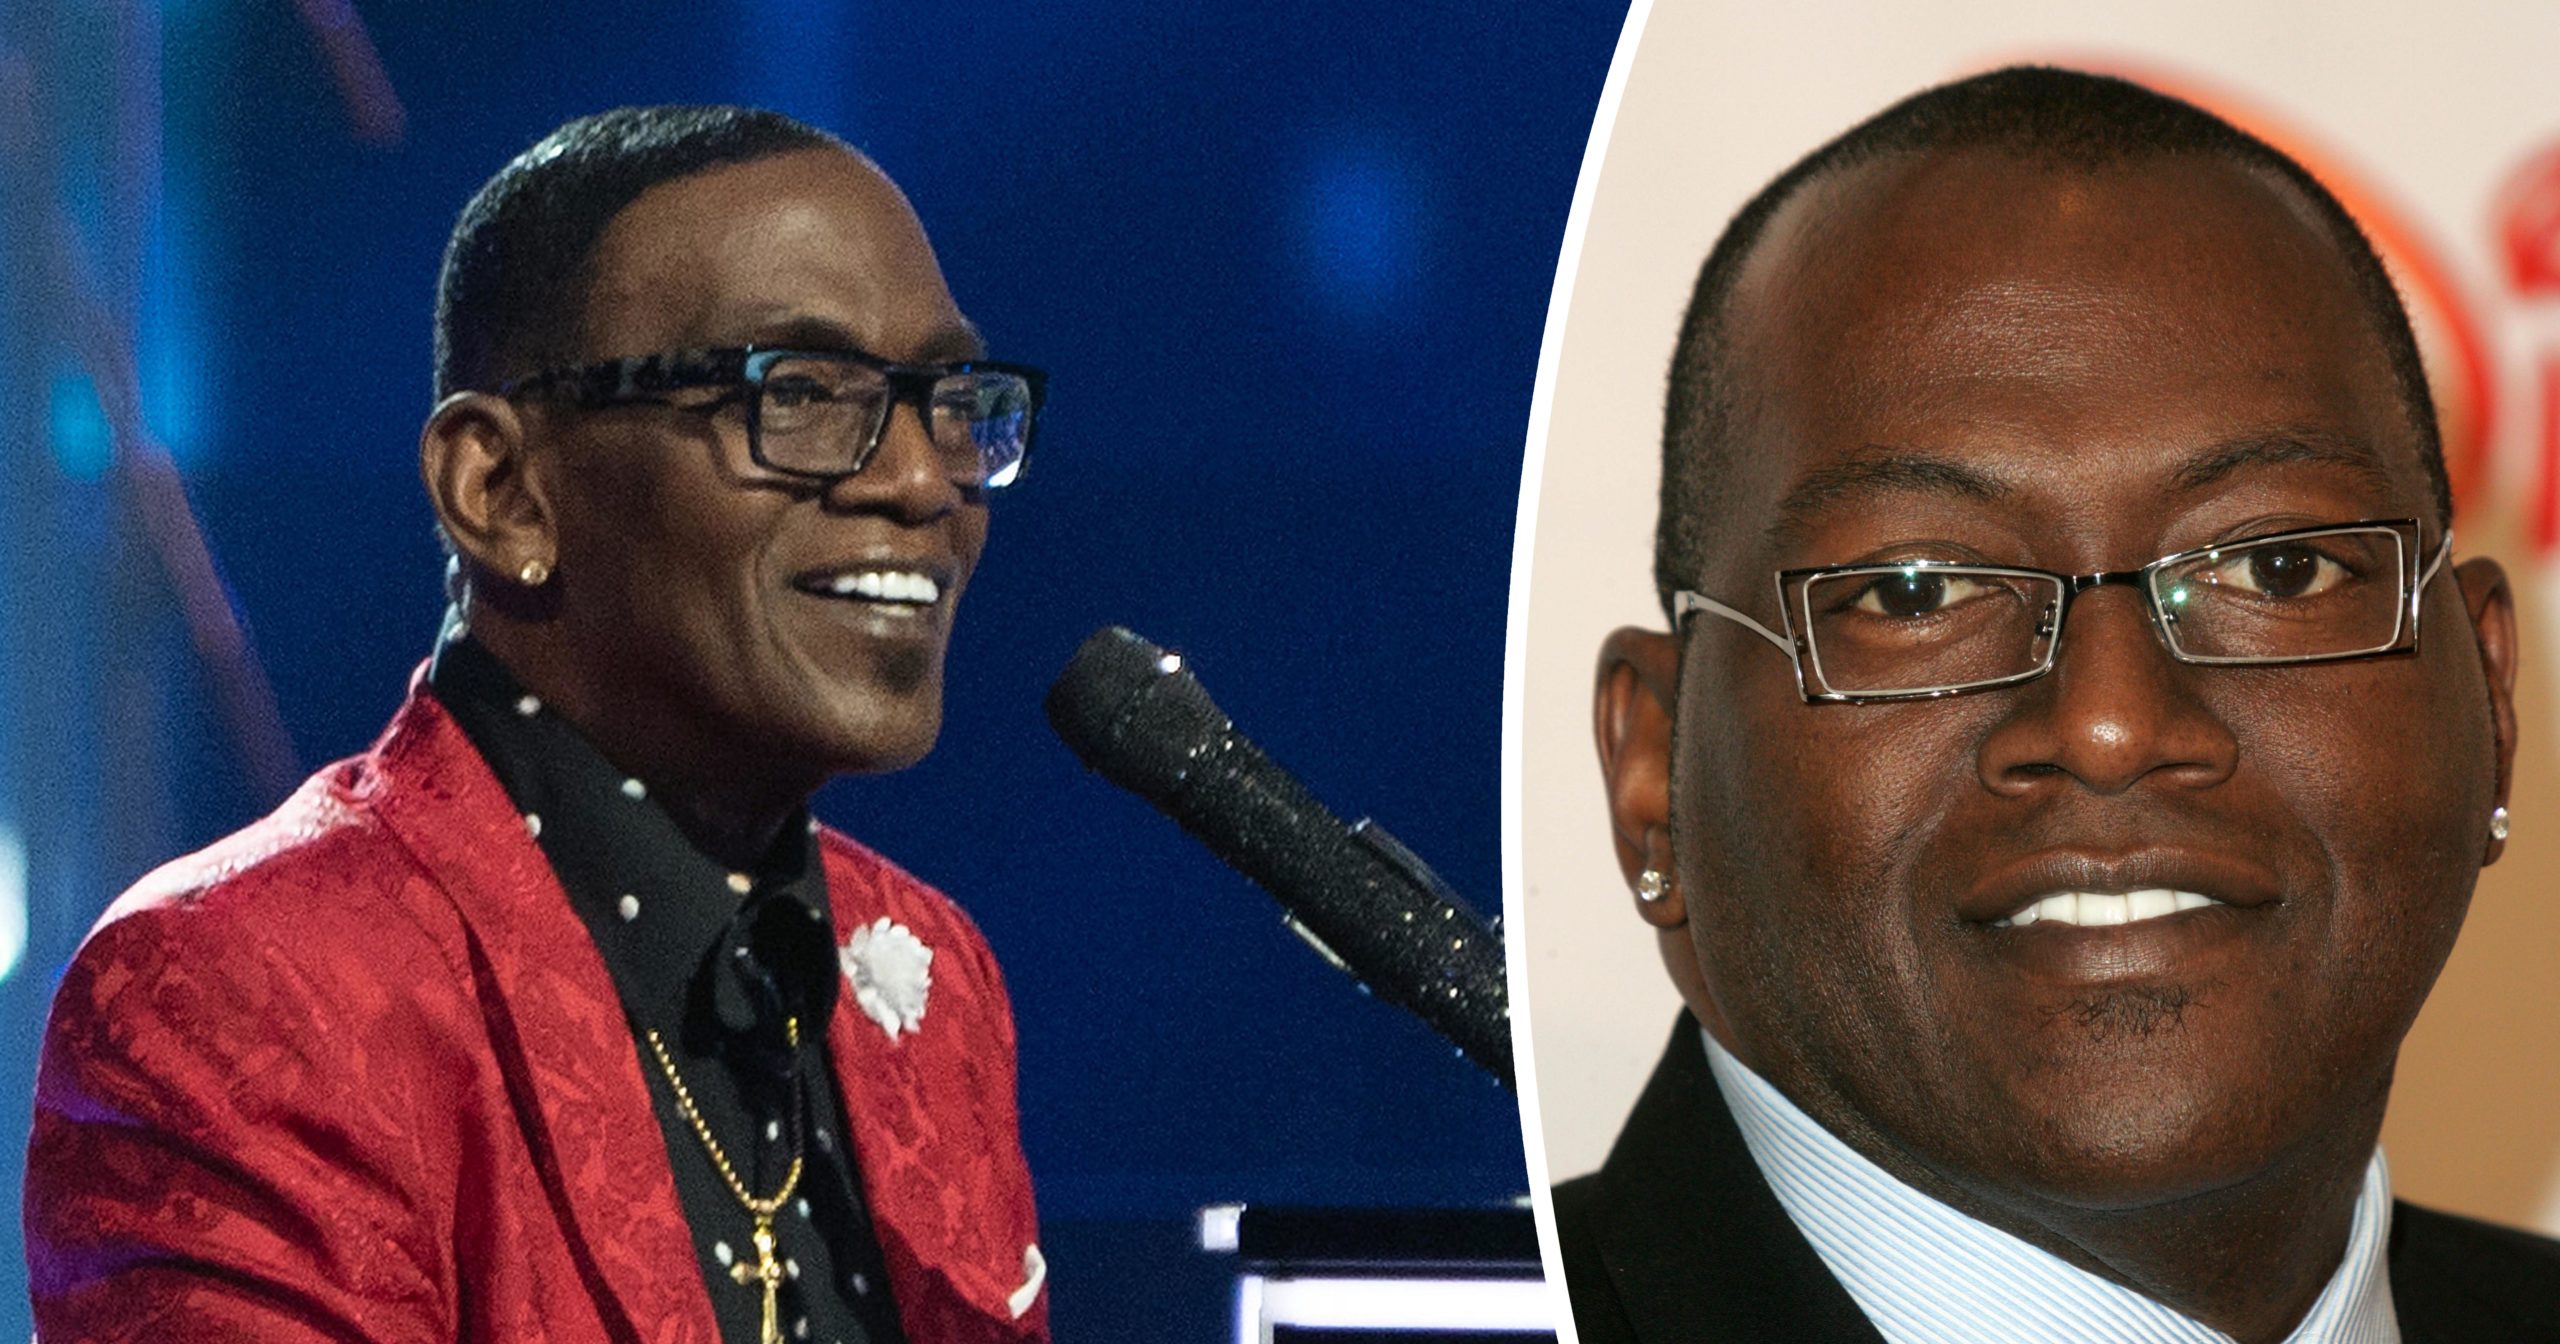 Randy Jackson lost more than 100 pounds and is doing better than ever